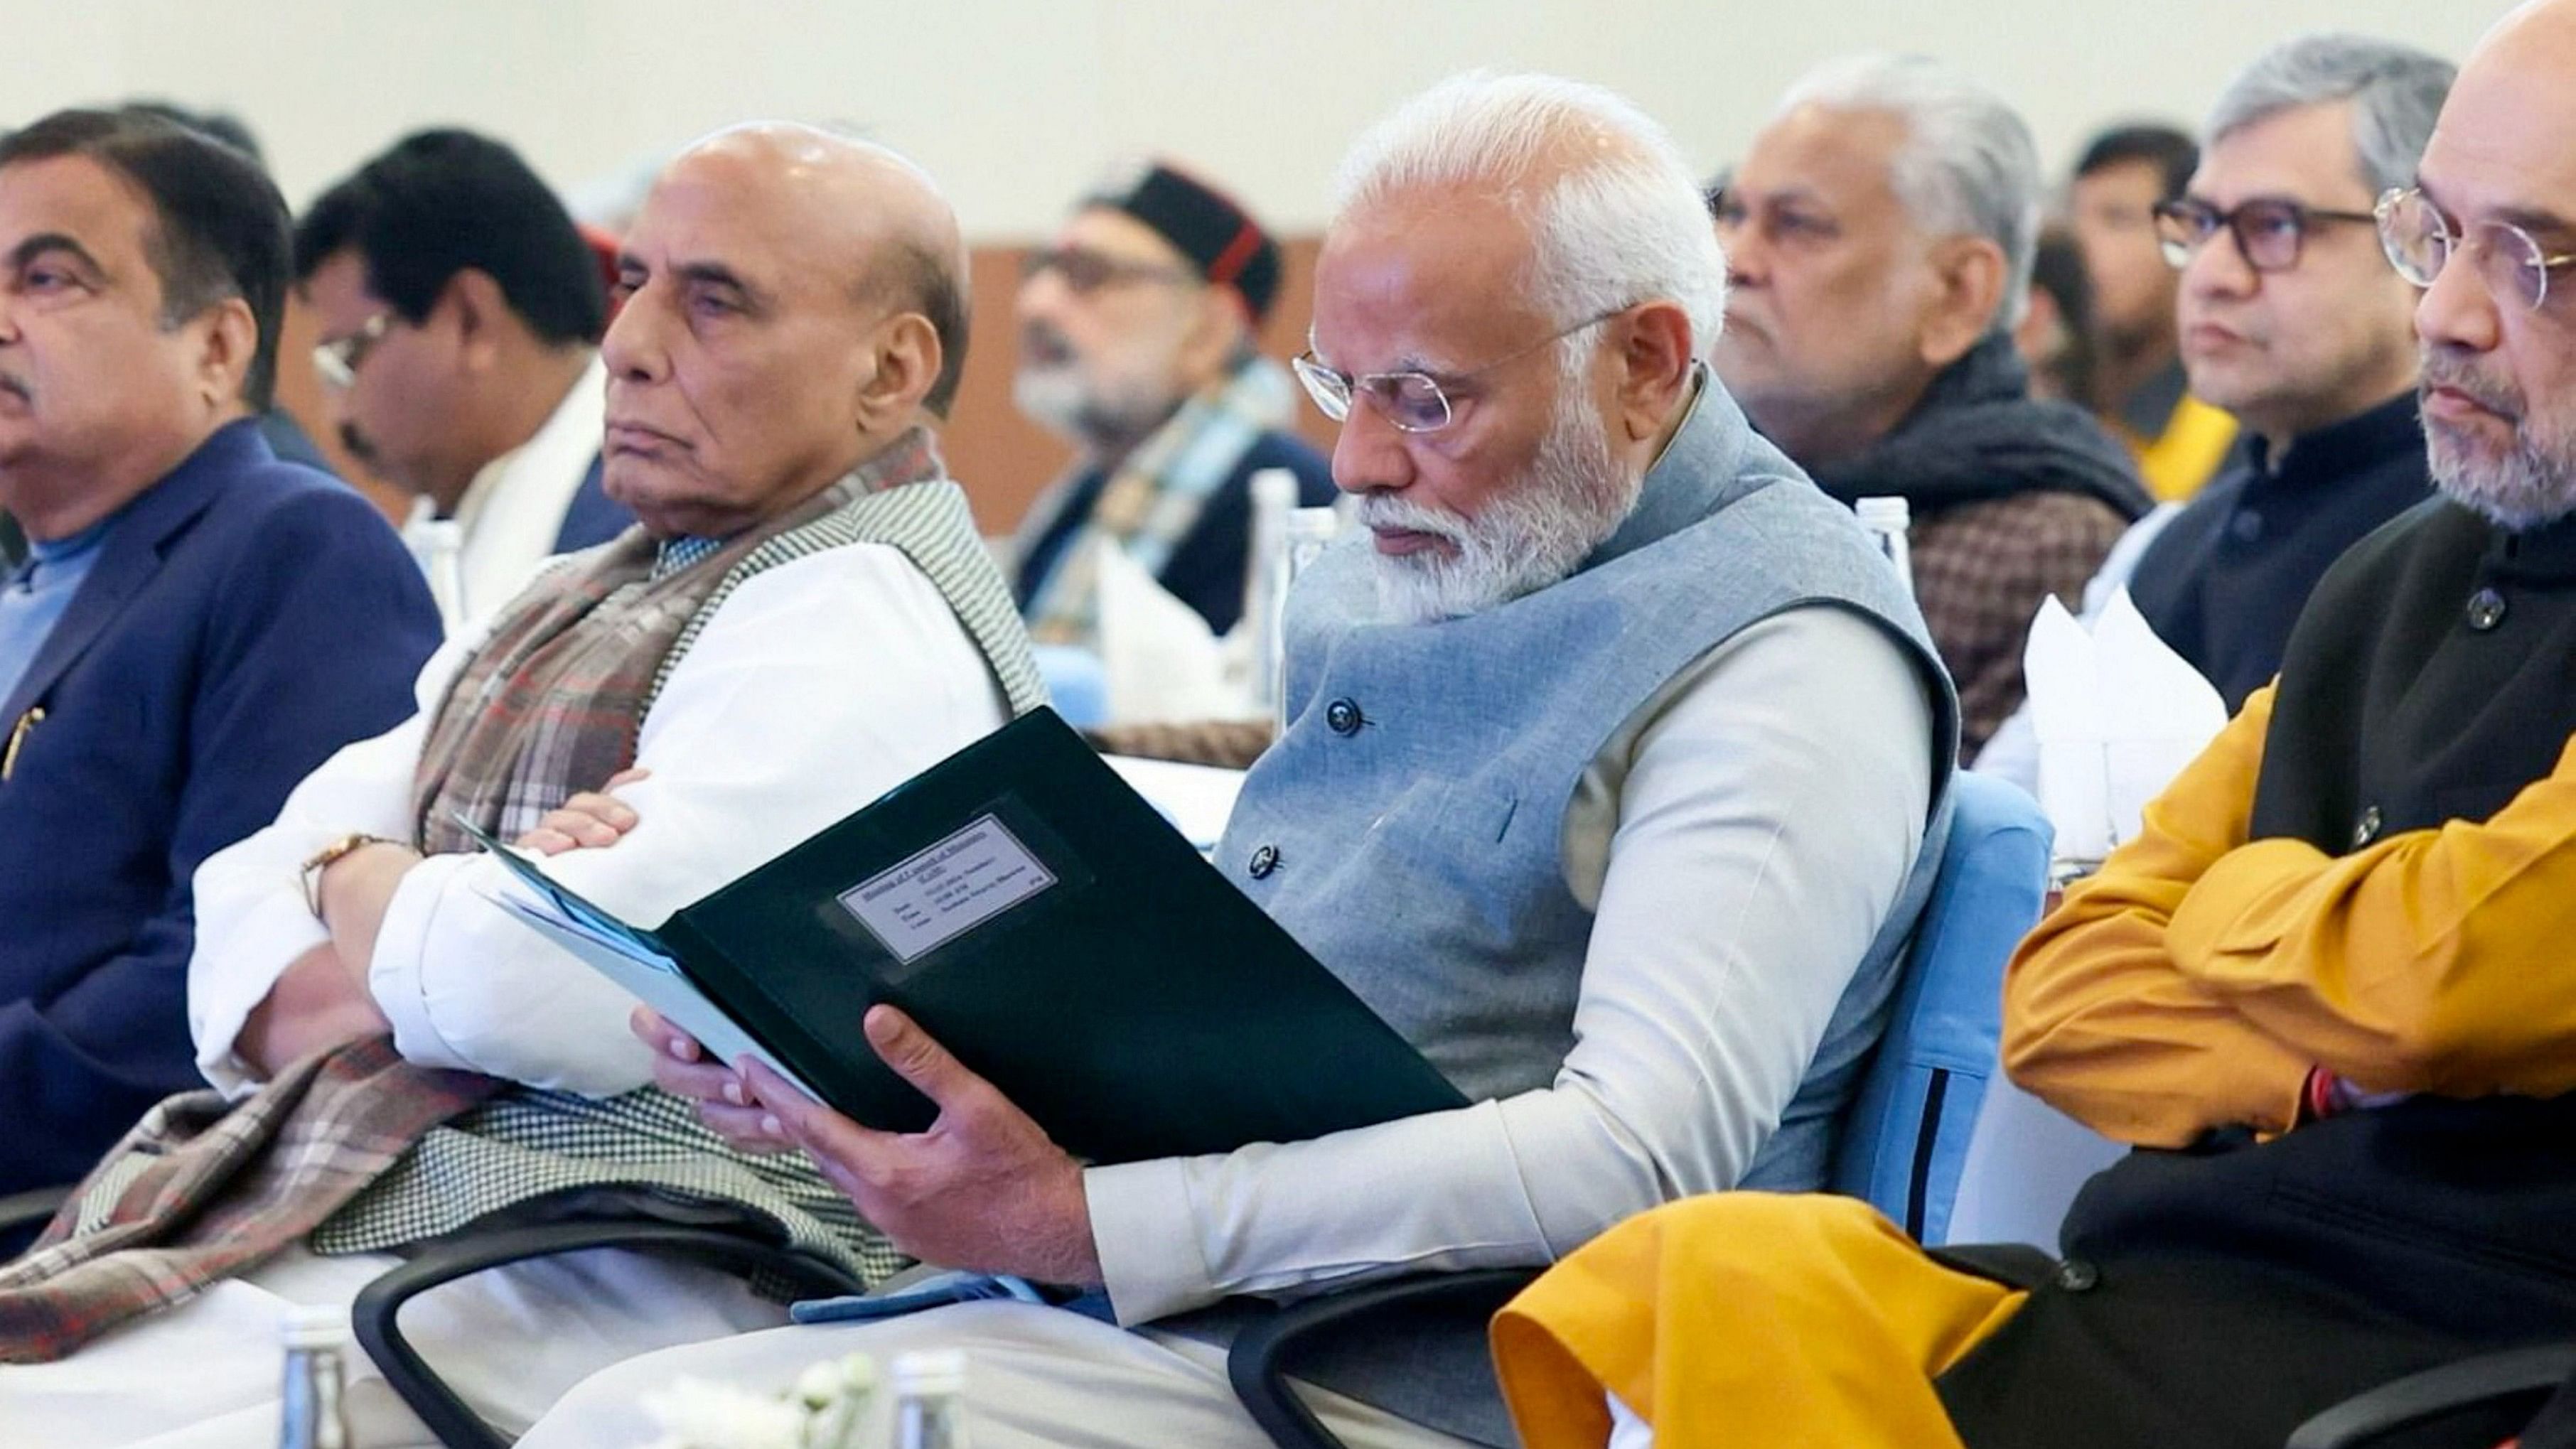 <div class="paragraphs"><p> Prime Minister Narendra Modi along with the Council of Ministers during a meeting on vision document for the Viksit Bharat 2047 &amp; detailed action plan for next 5 years, in New Delhi</p></div>